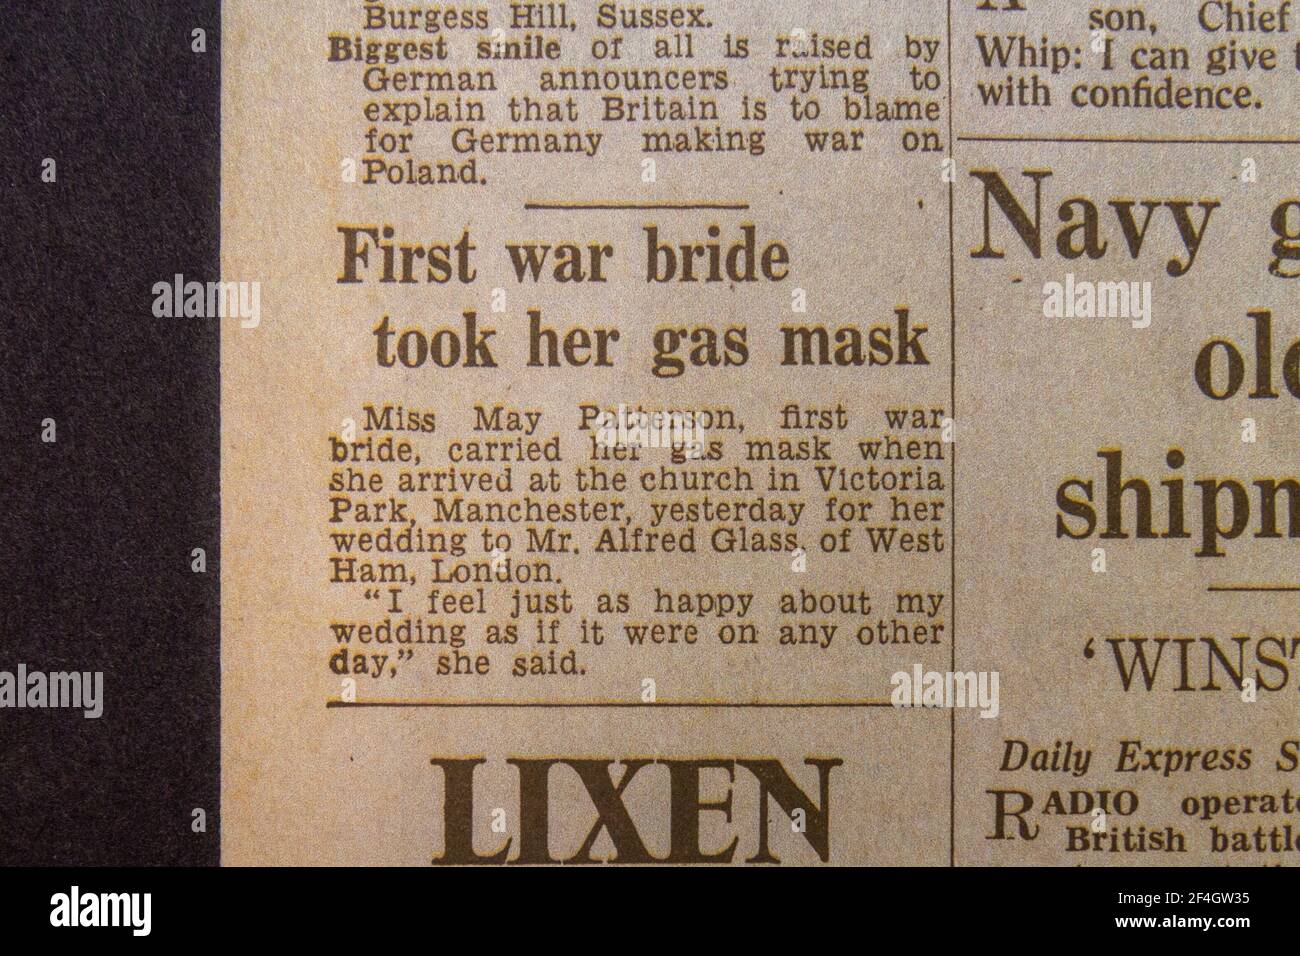 'First war bride took her gas mask' headline in The Daily Express (replica), 4th September 1939, the day after World War II was declared. Stock Photo